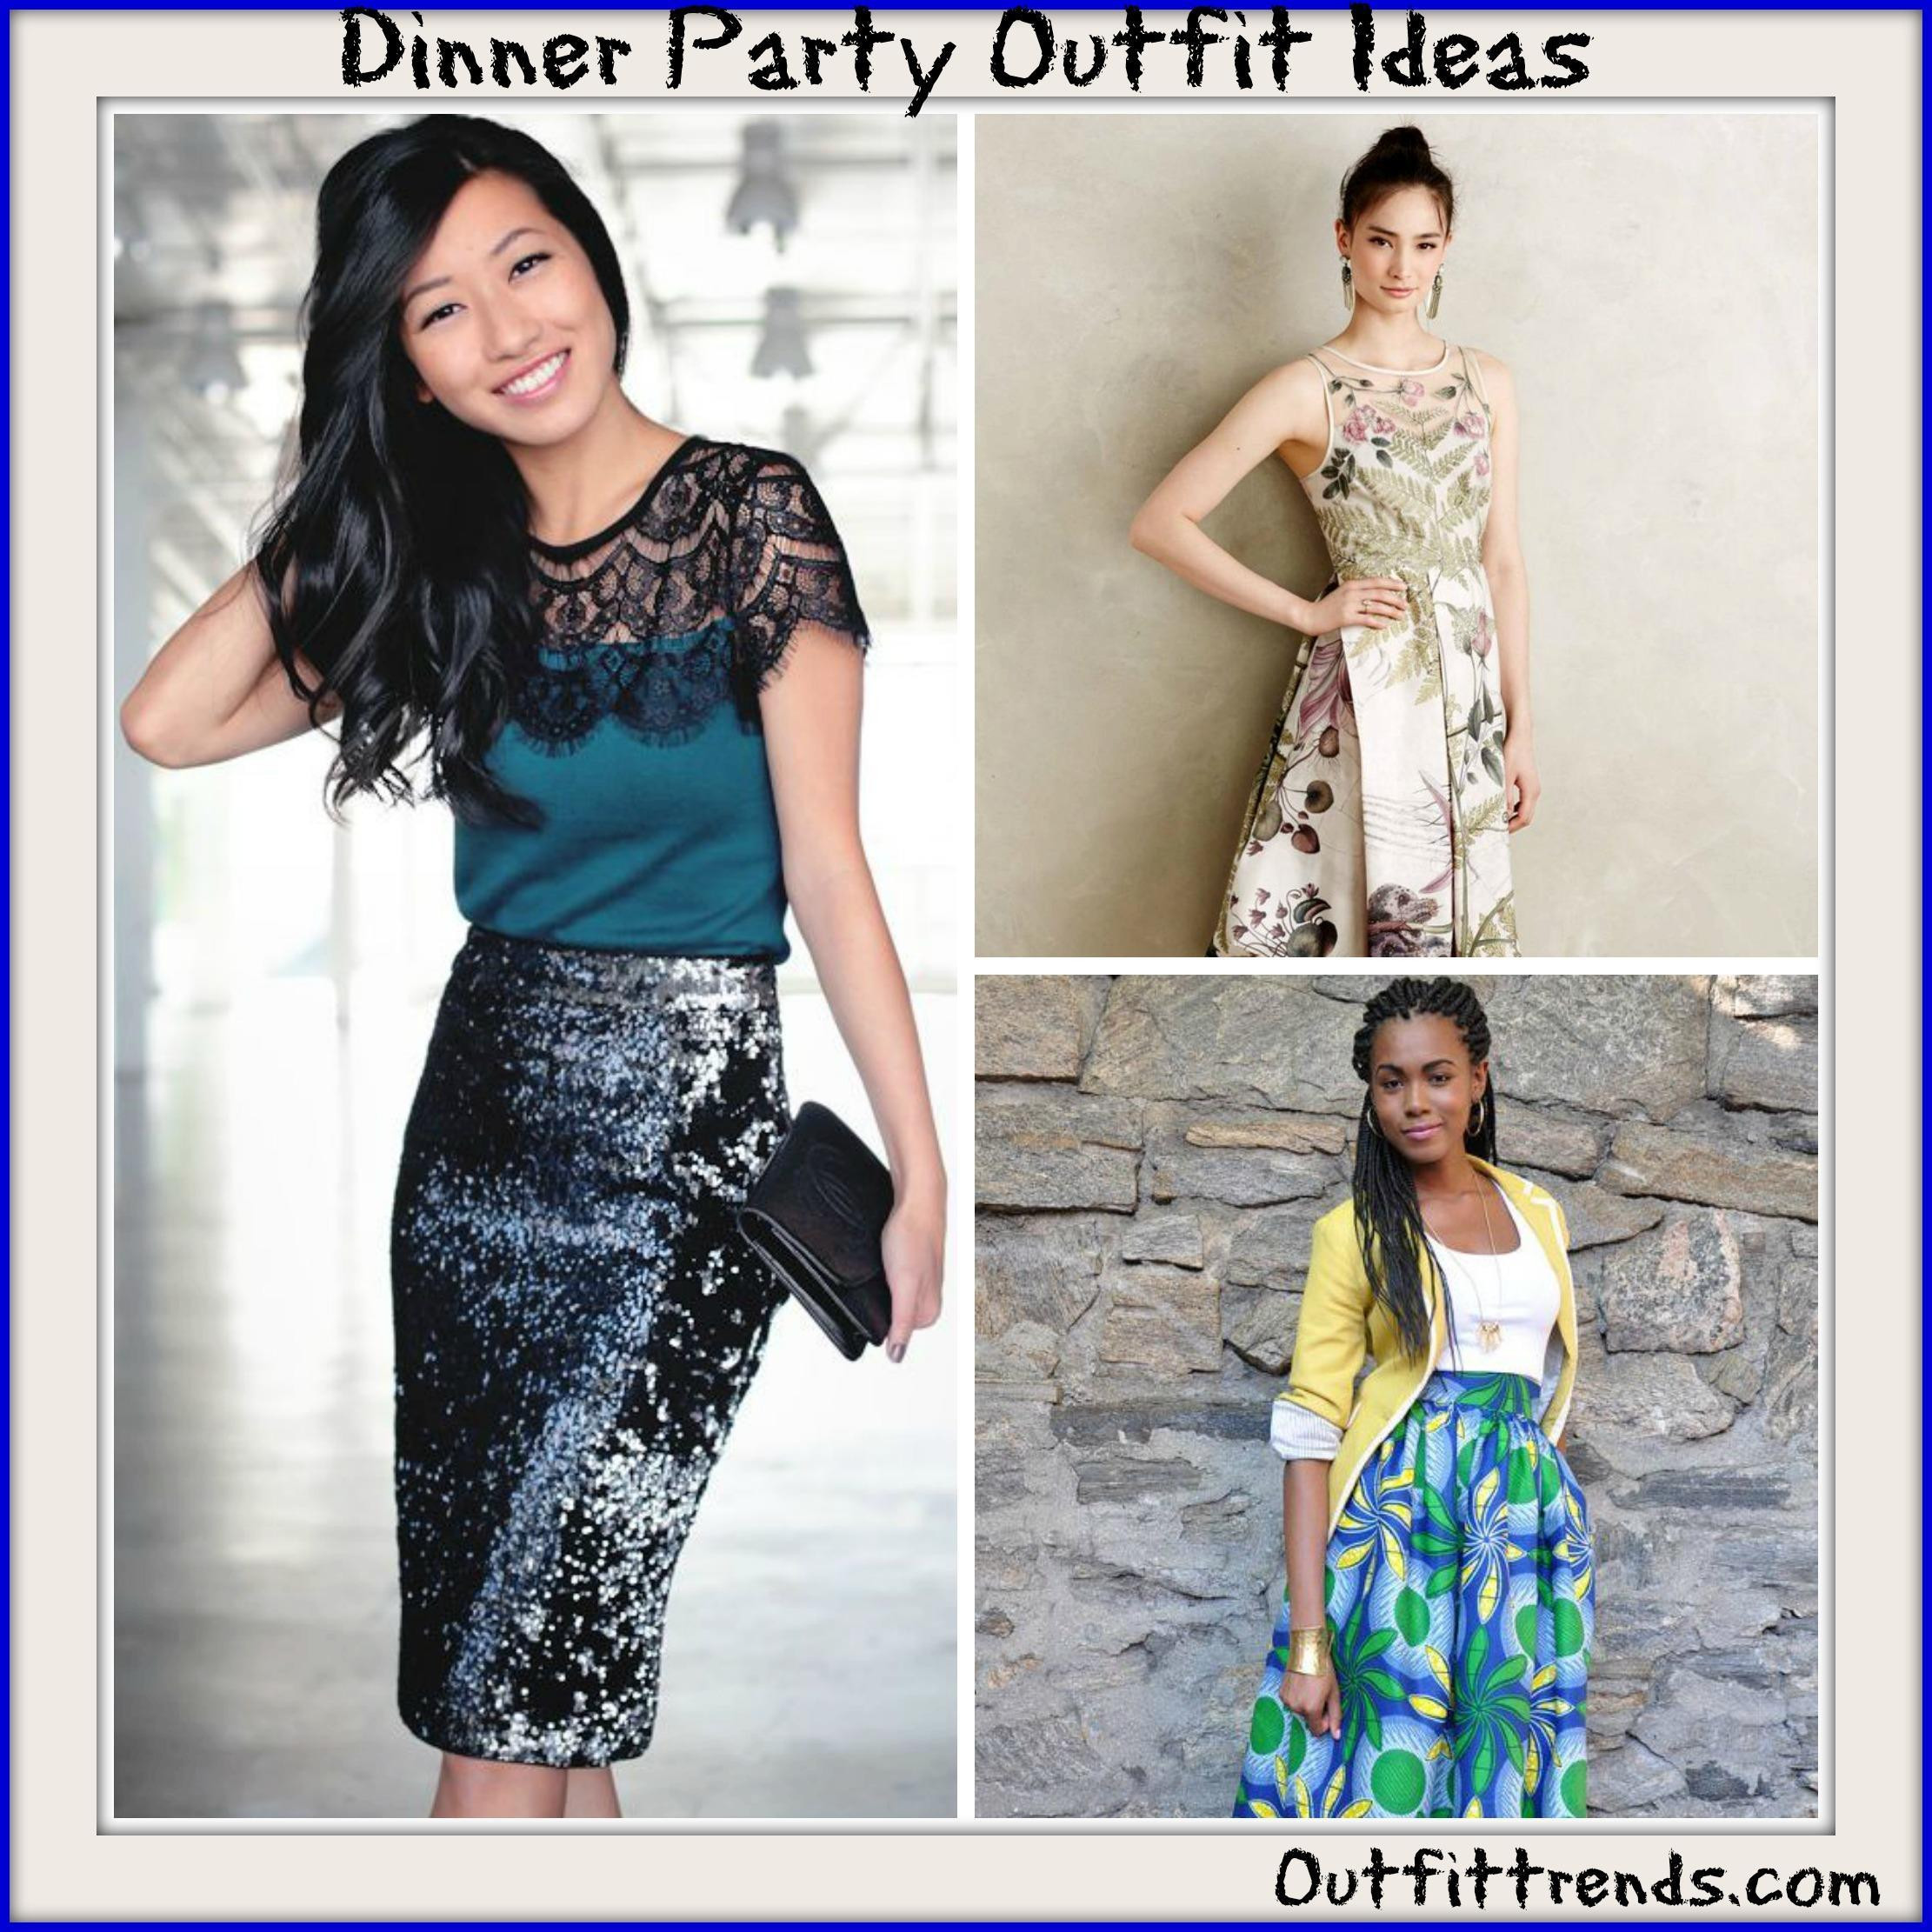 Dinner Party Dress Ideas
 Dinner Party Outfits 25 Ideas What to Wear to a Dinner Party